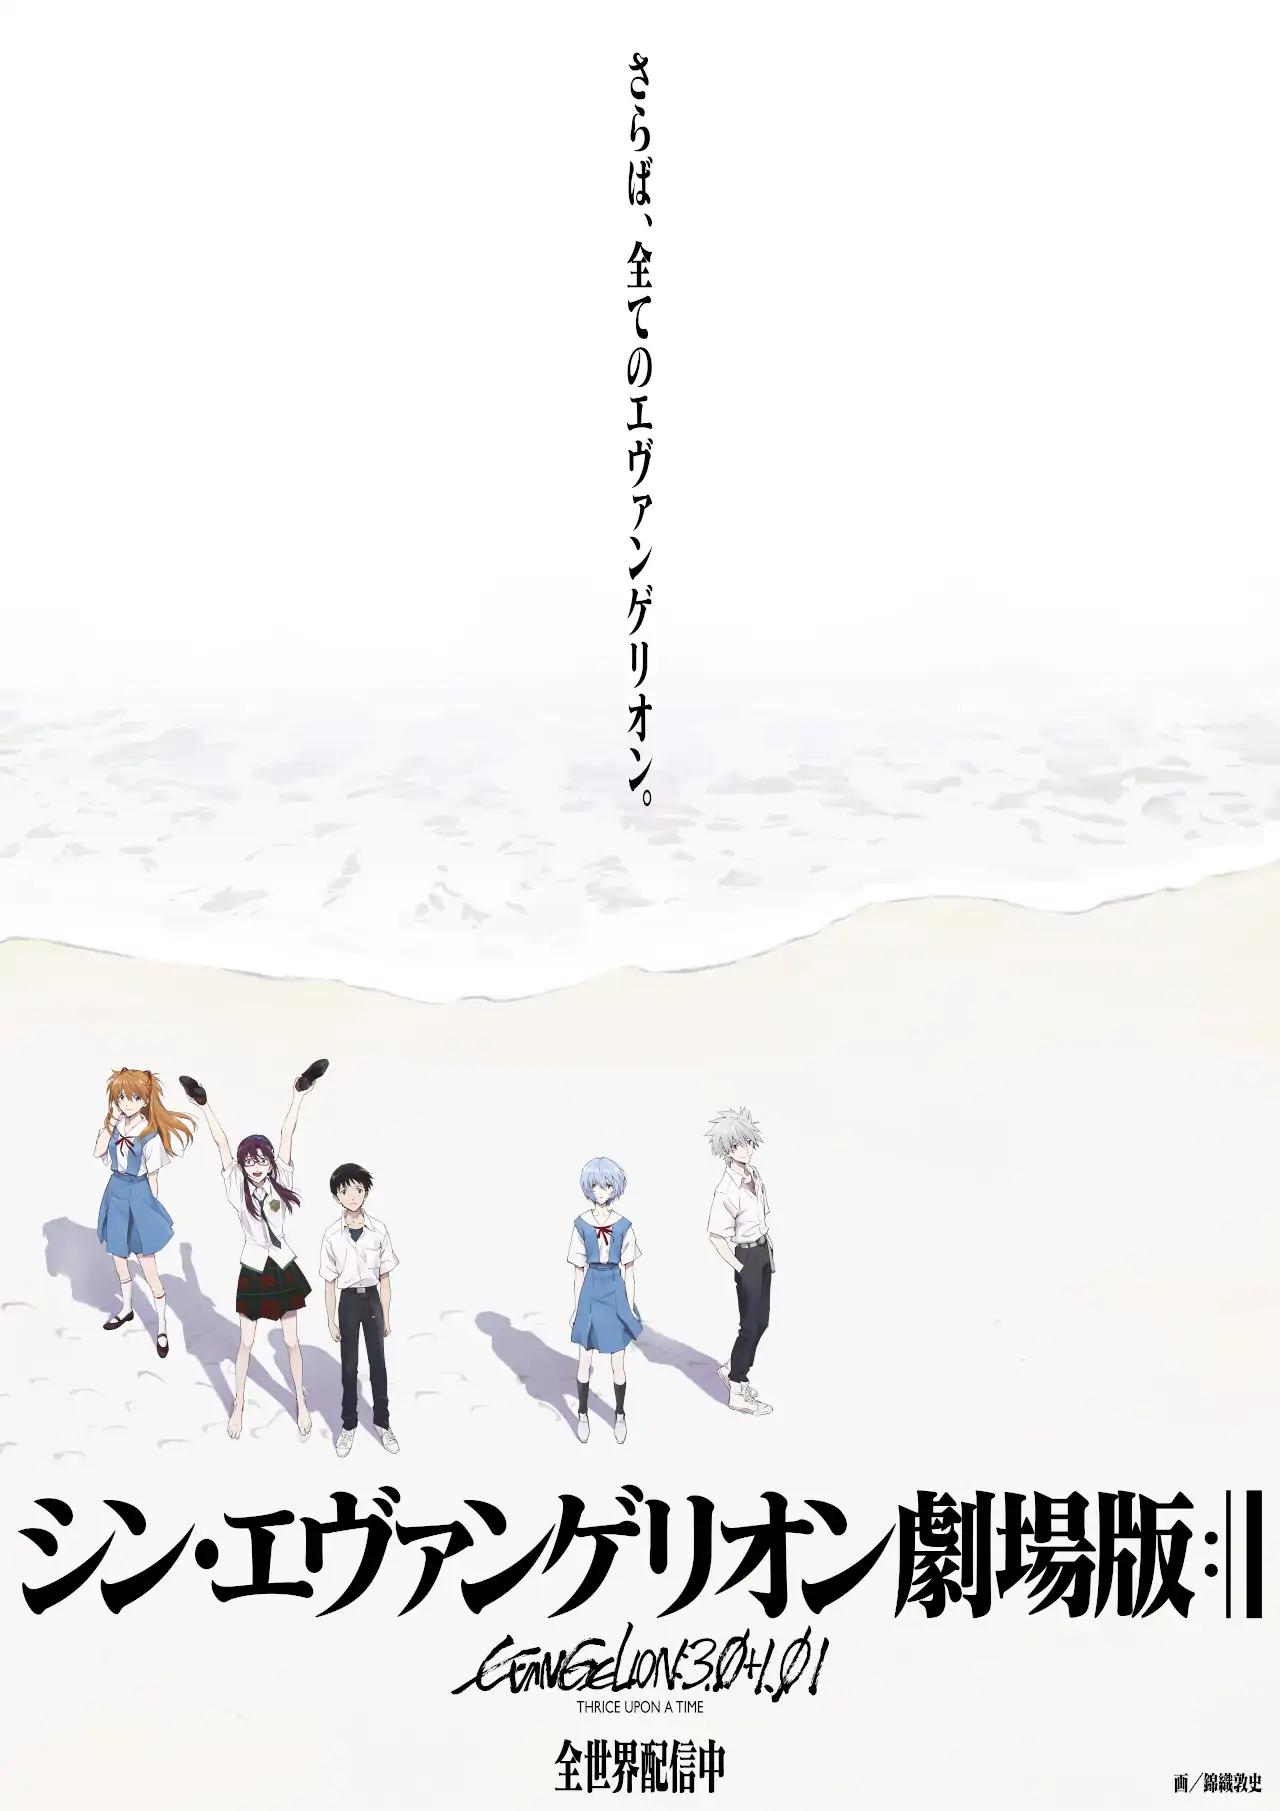 Evangelion: 3.0+1.0 Thrice Upon a Time Final Poster